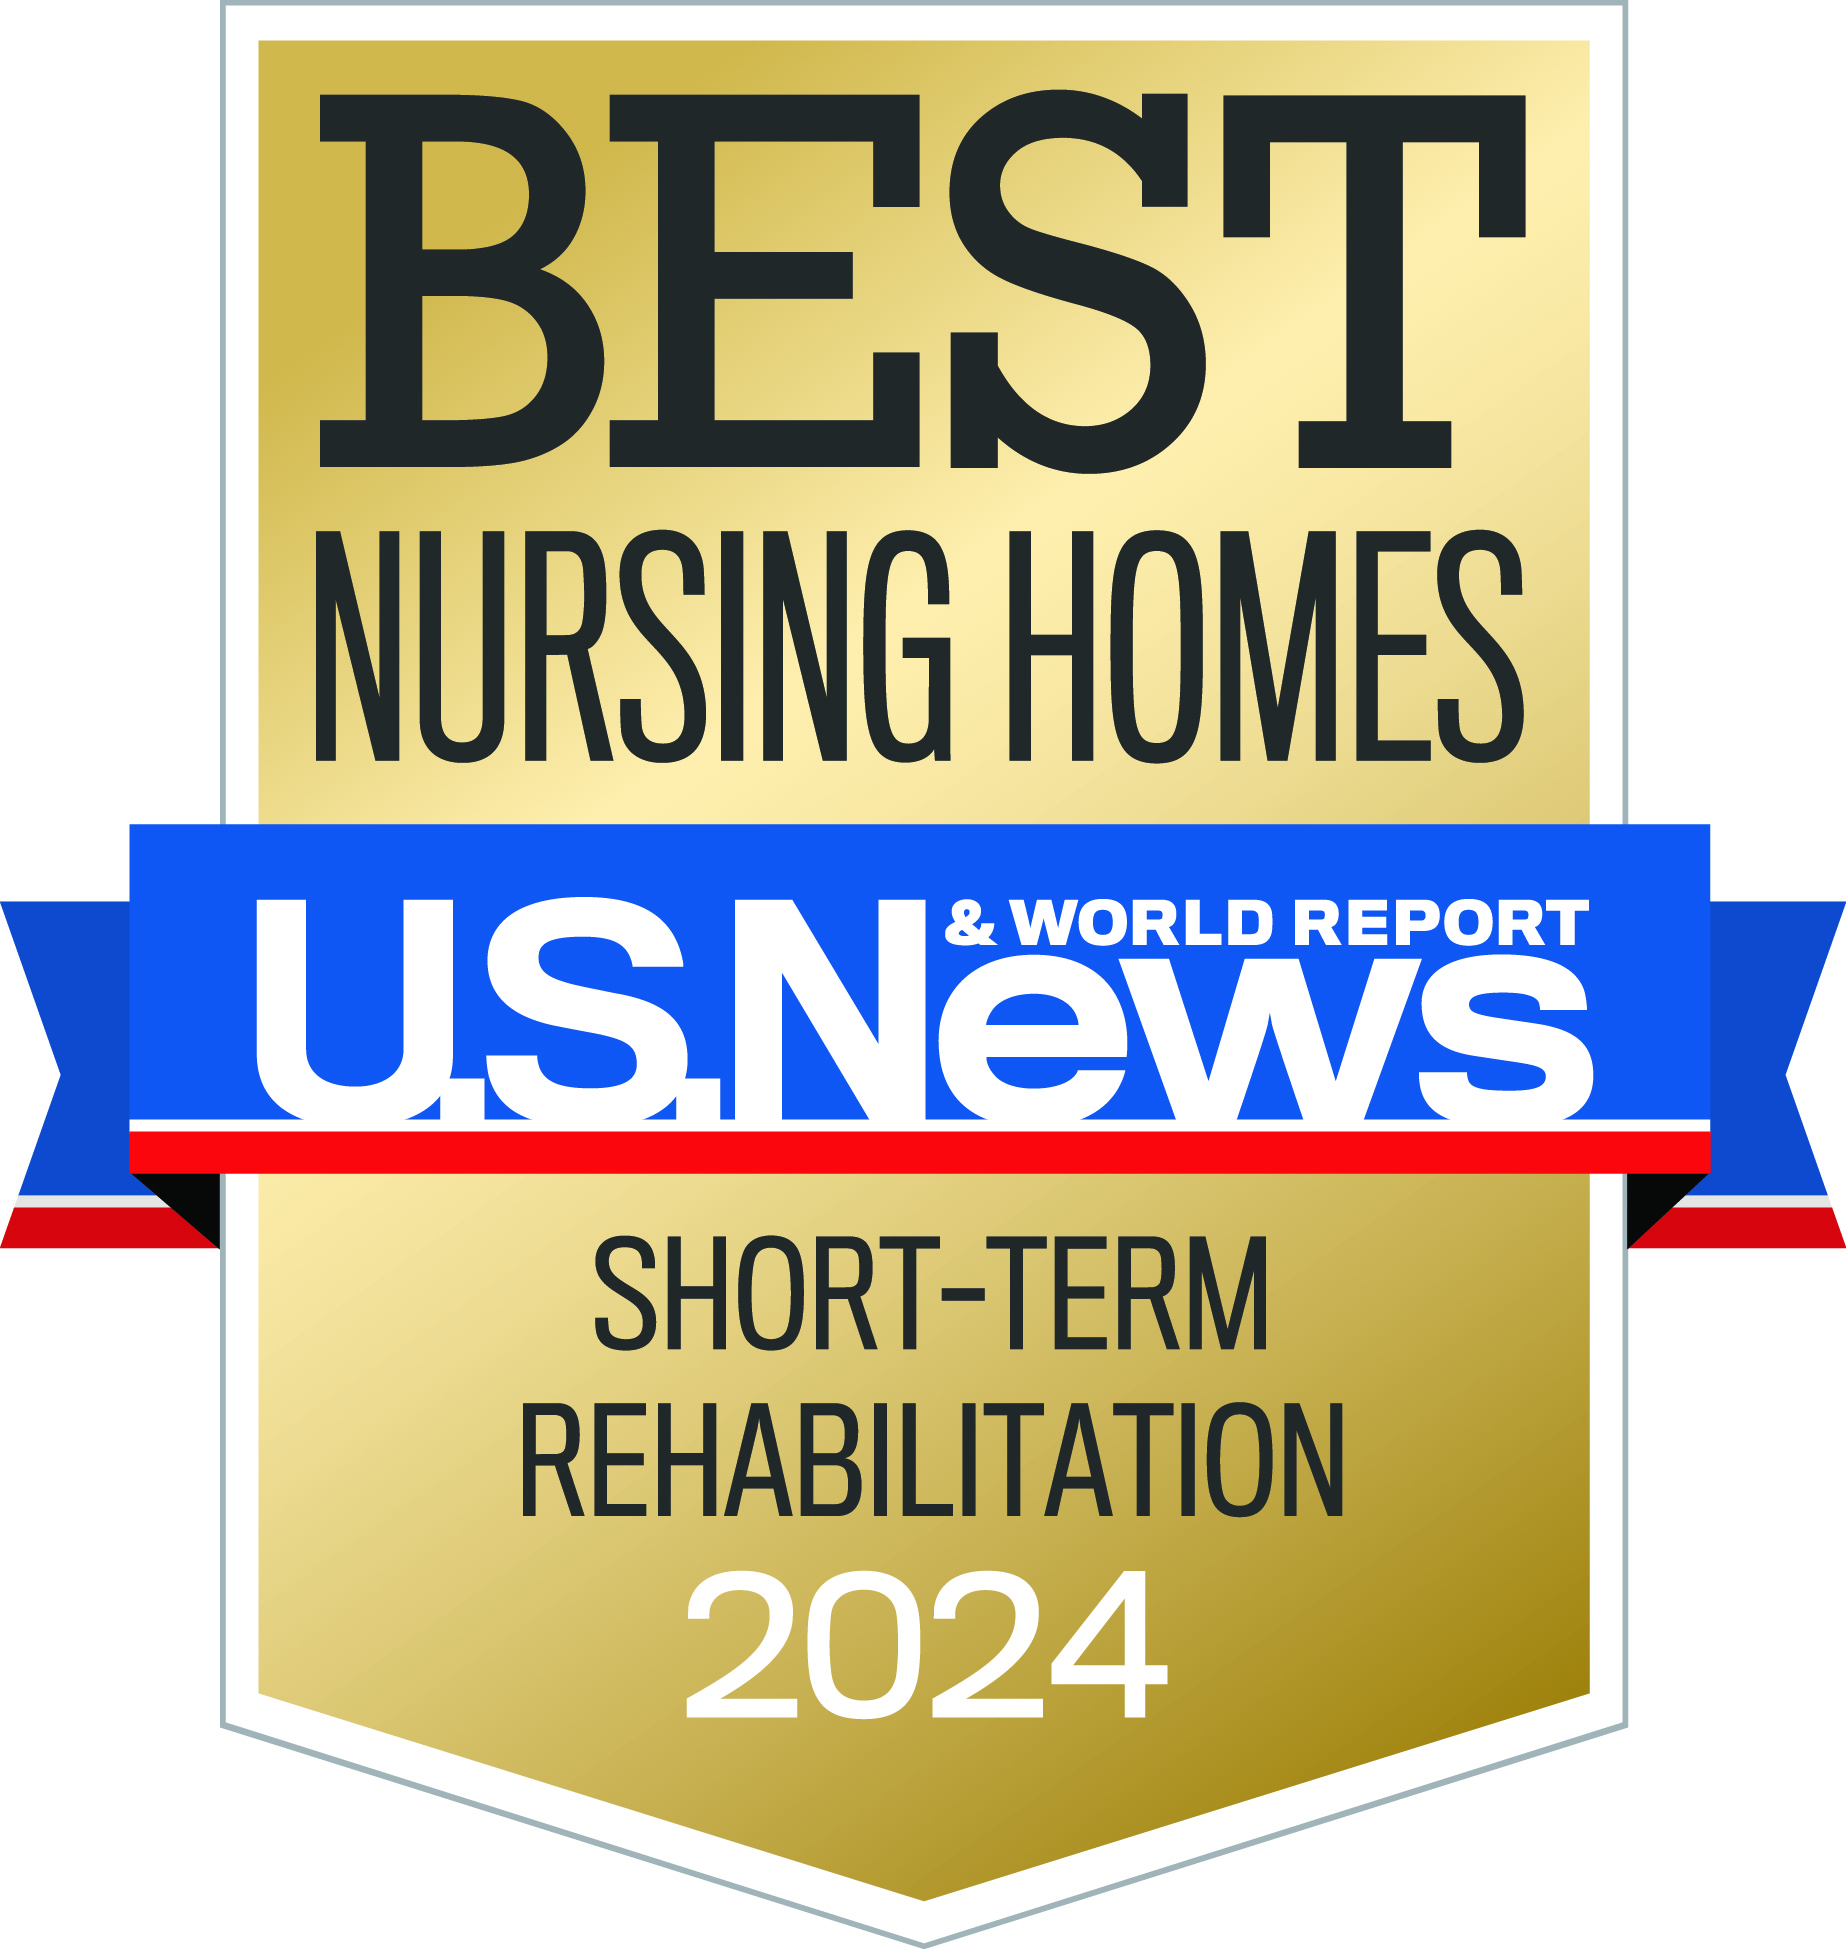 Three Skilled Nursing Facilities Earn Top Ranking for Short-Term Care